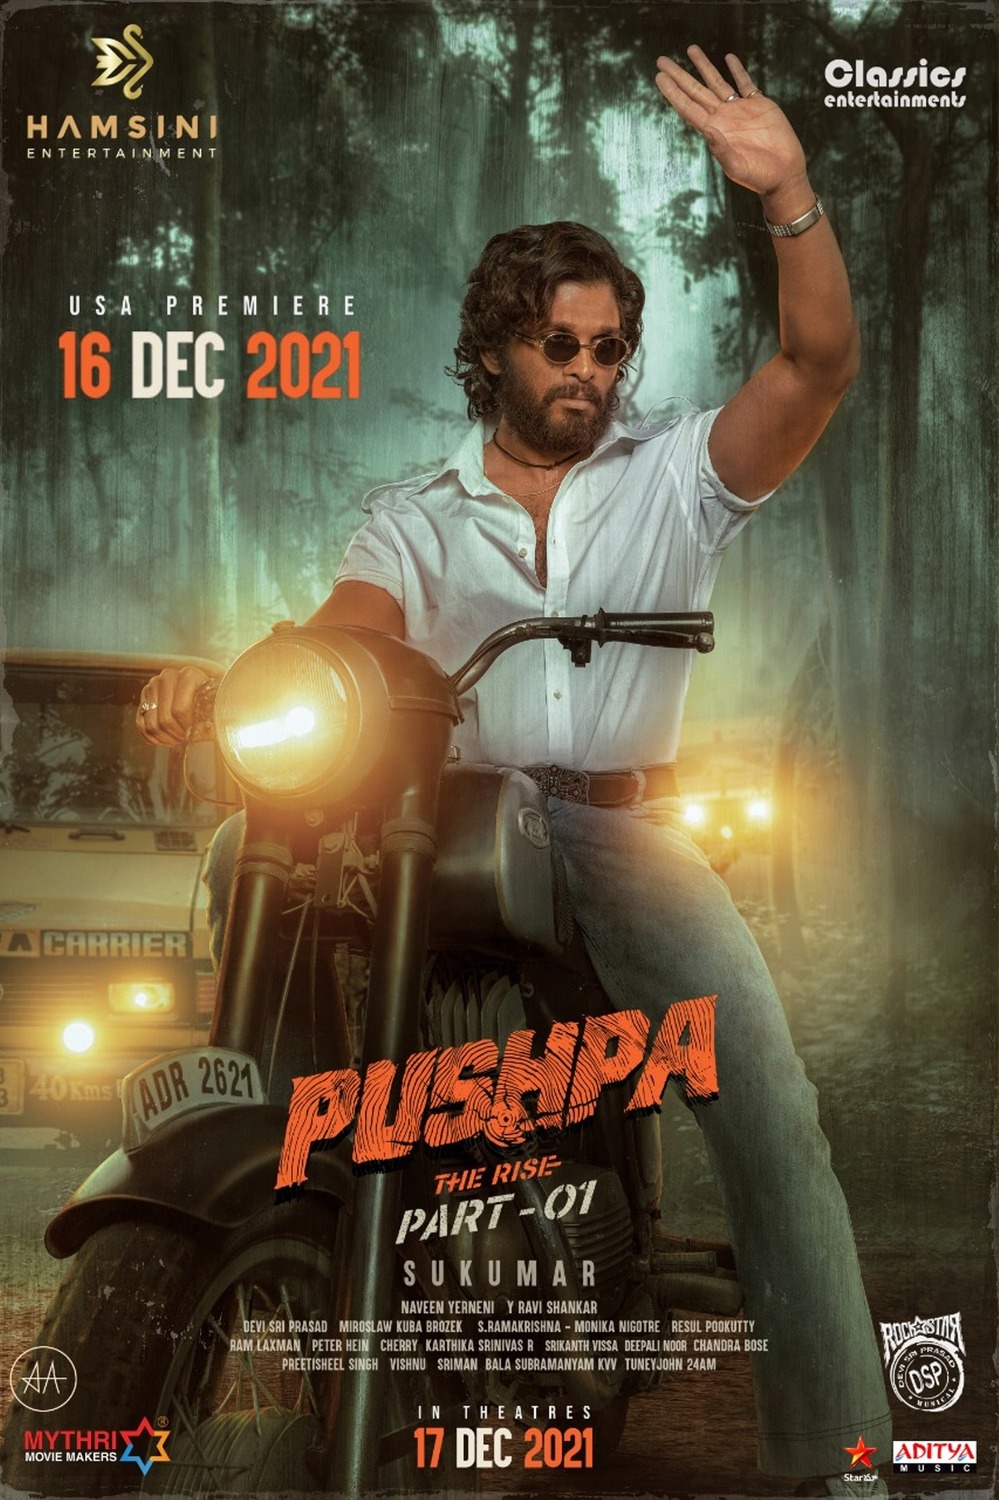 Extra Large Movie Poster Image for Pushpa: The Rise - Part 1 